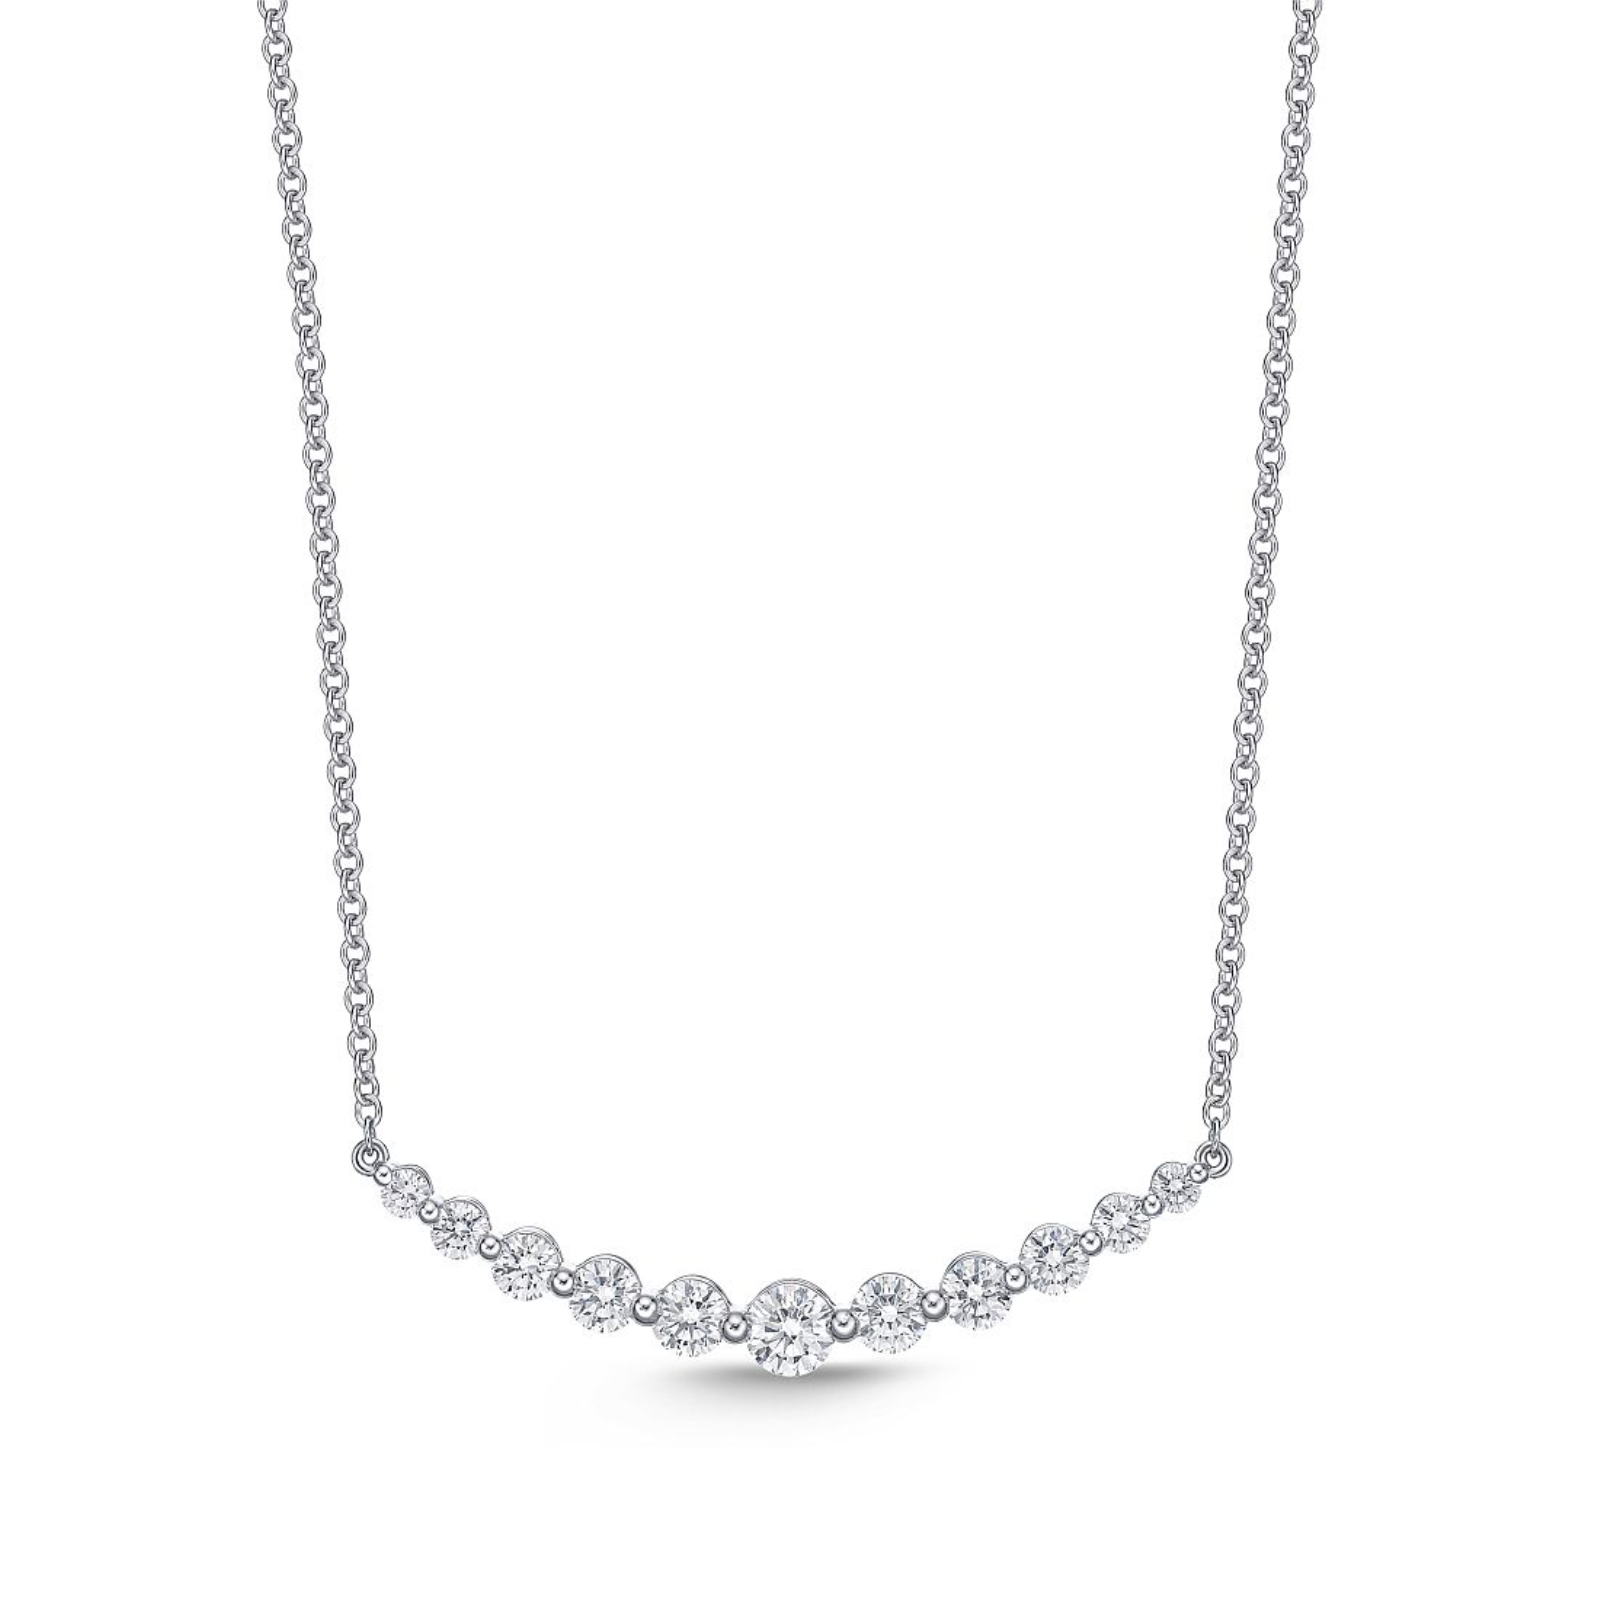 White Gold and Diamond Smile Necklace